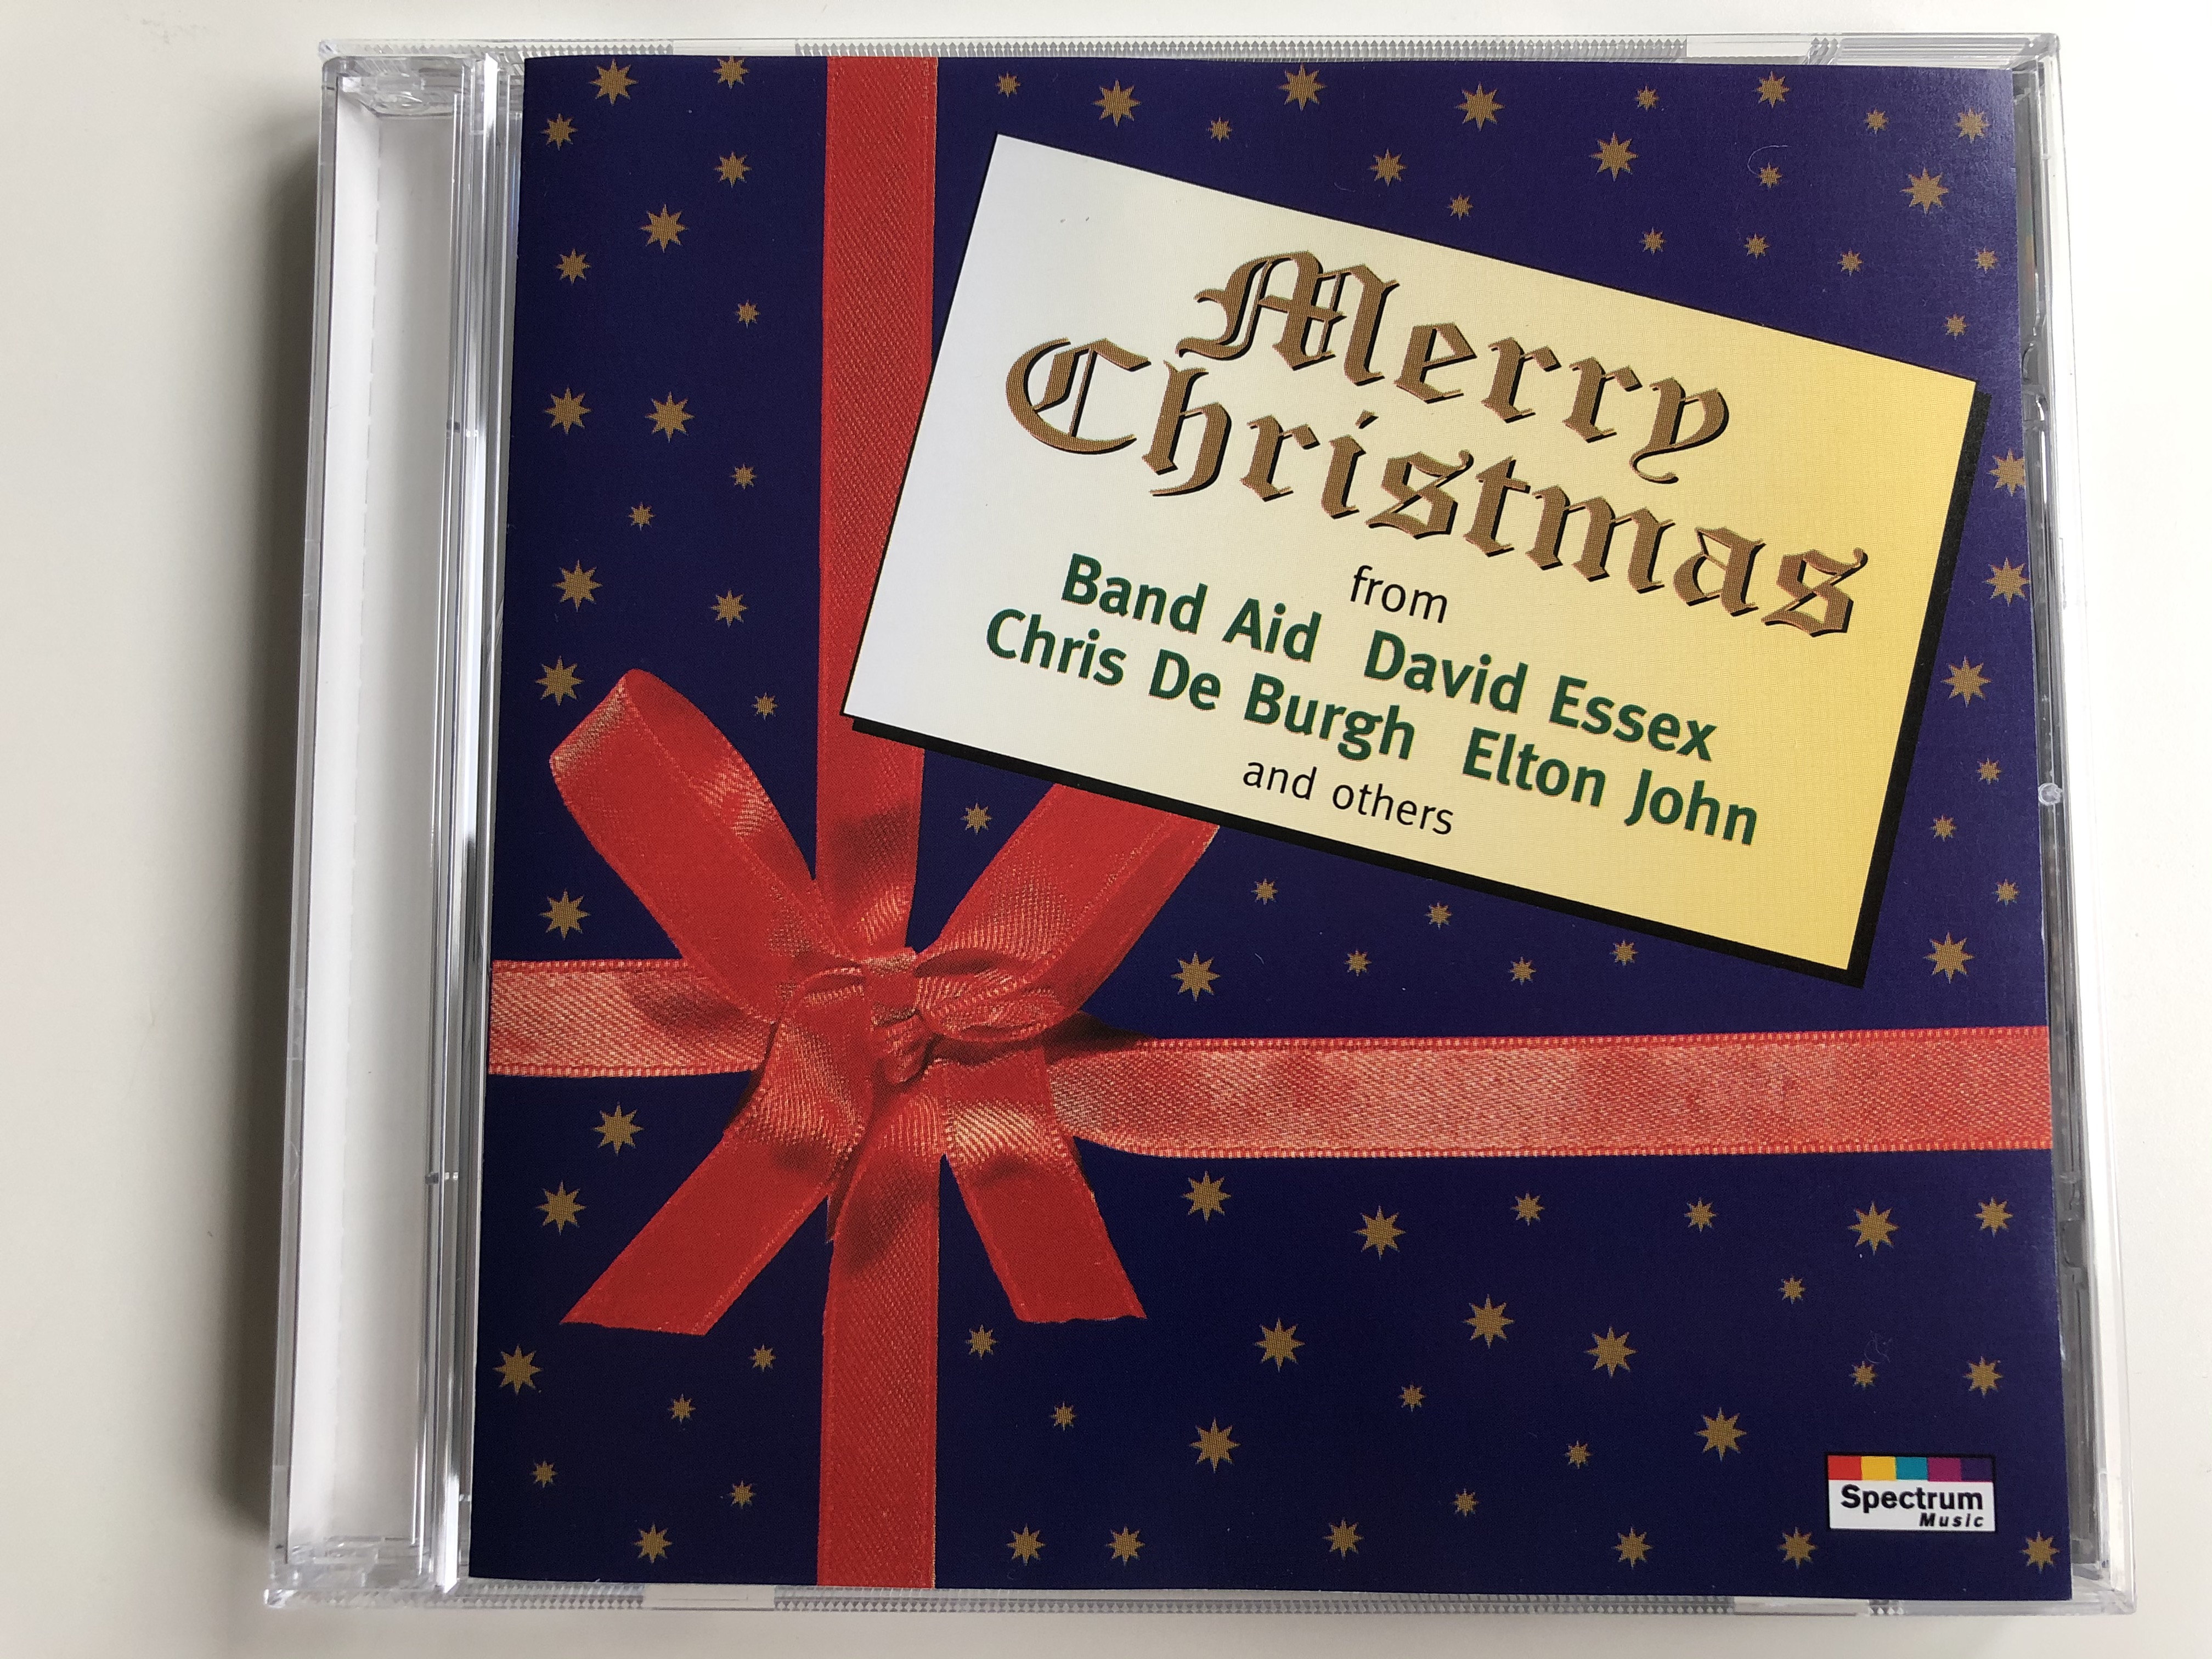 merry-christmas-from-band-aid-david-essex-chris-de-burgh-elton-john-and-others-karussell-audio-cd-1994-550-416-2-1-.jpg